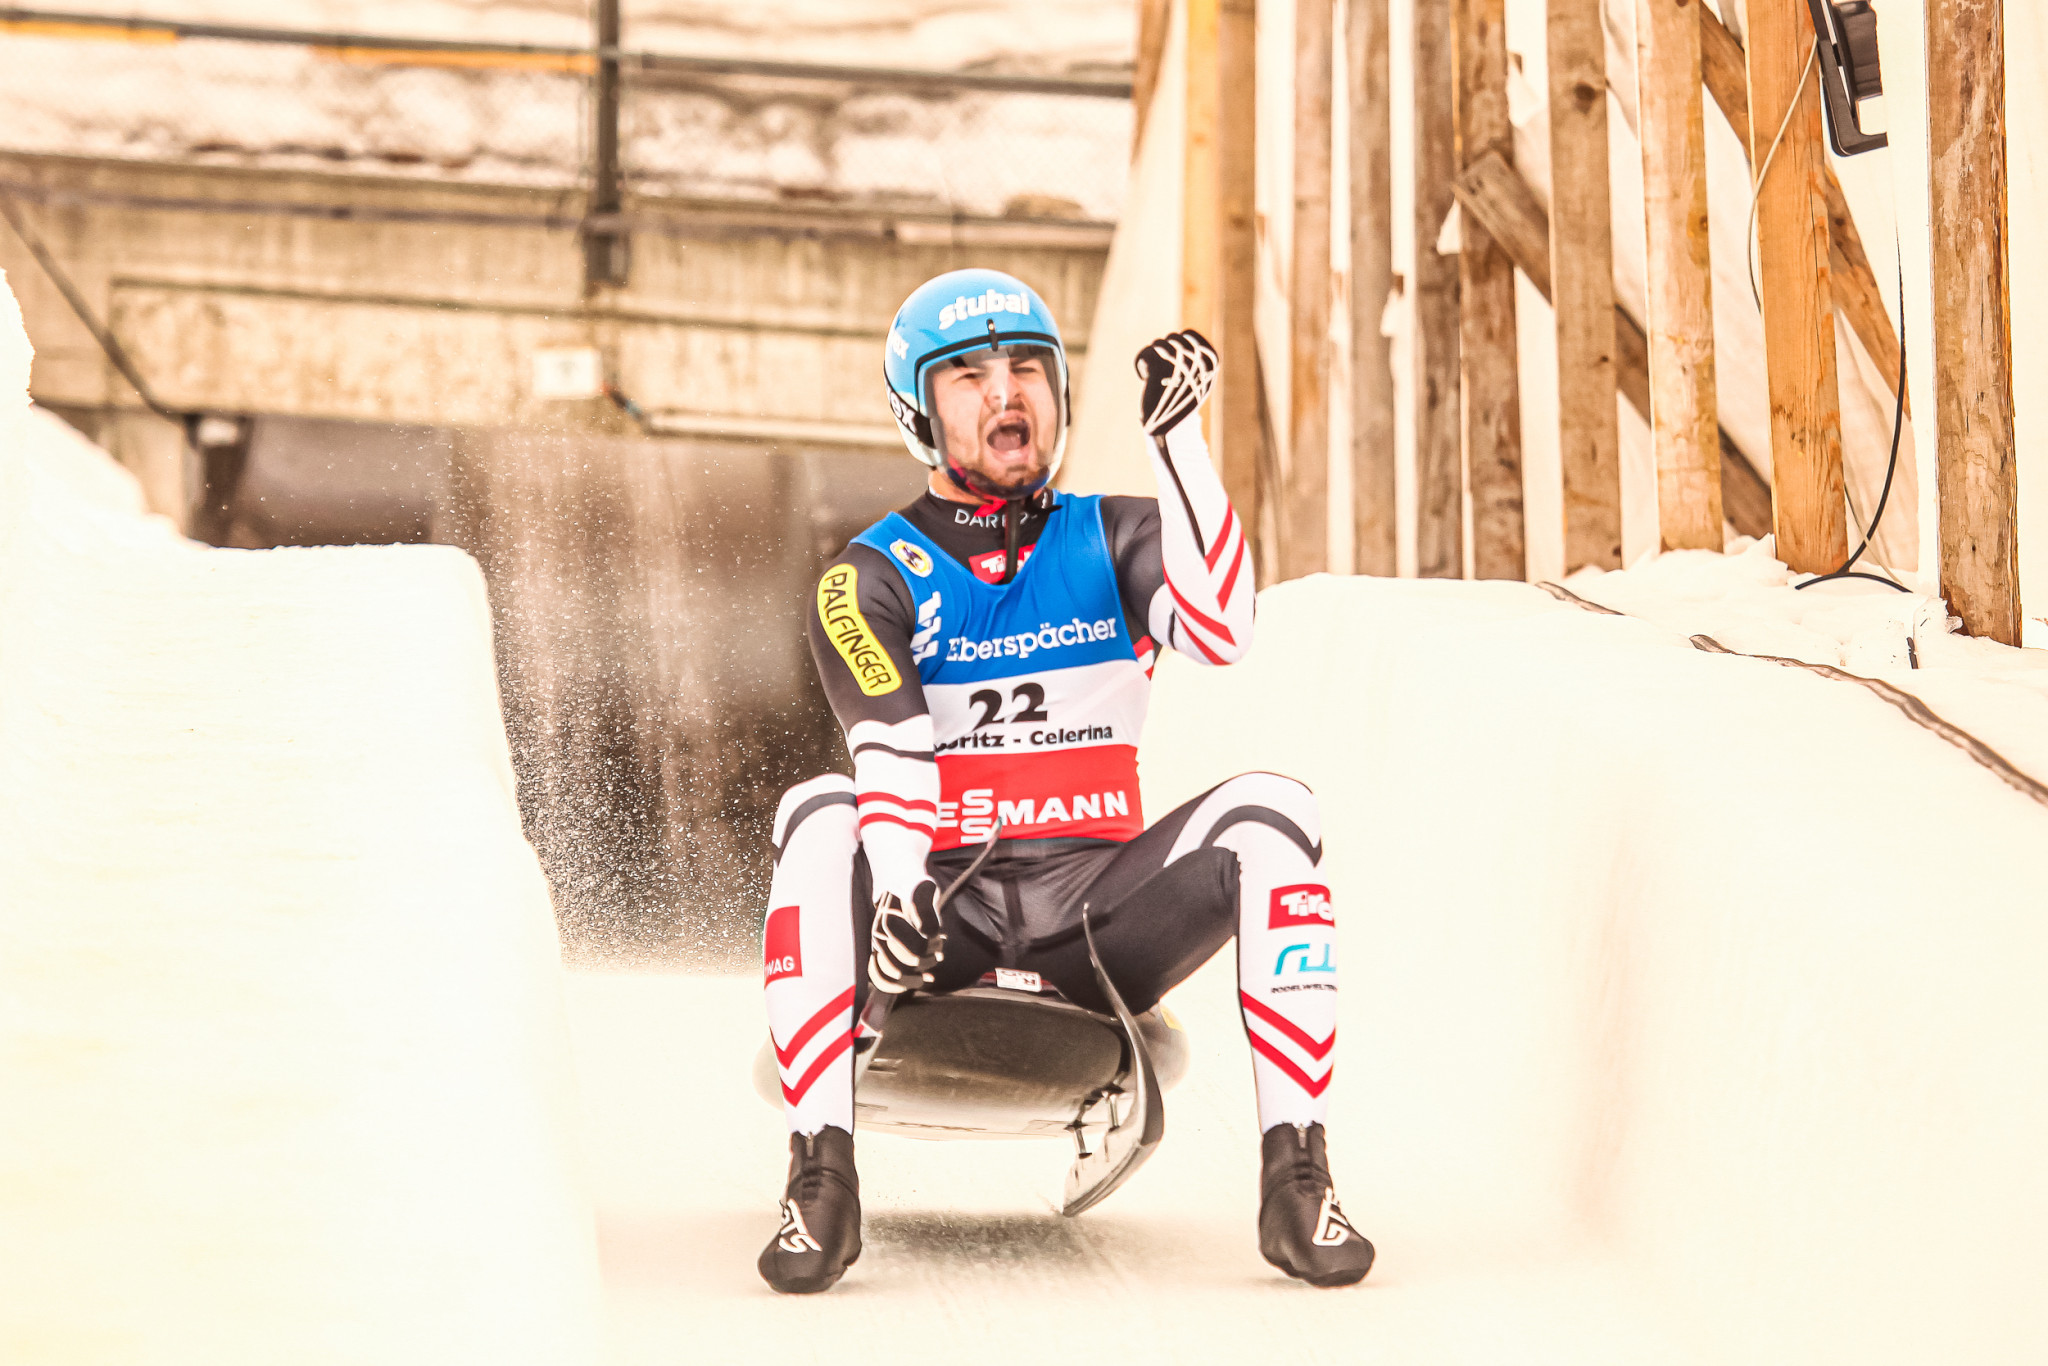 Nico Gleirscher won the men's singles contest at the Luge World Cup in St Moritz ©FIL